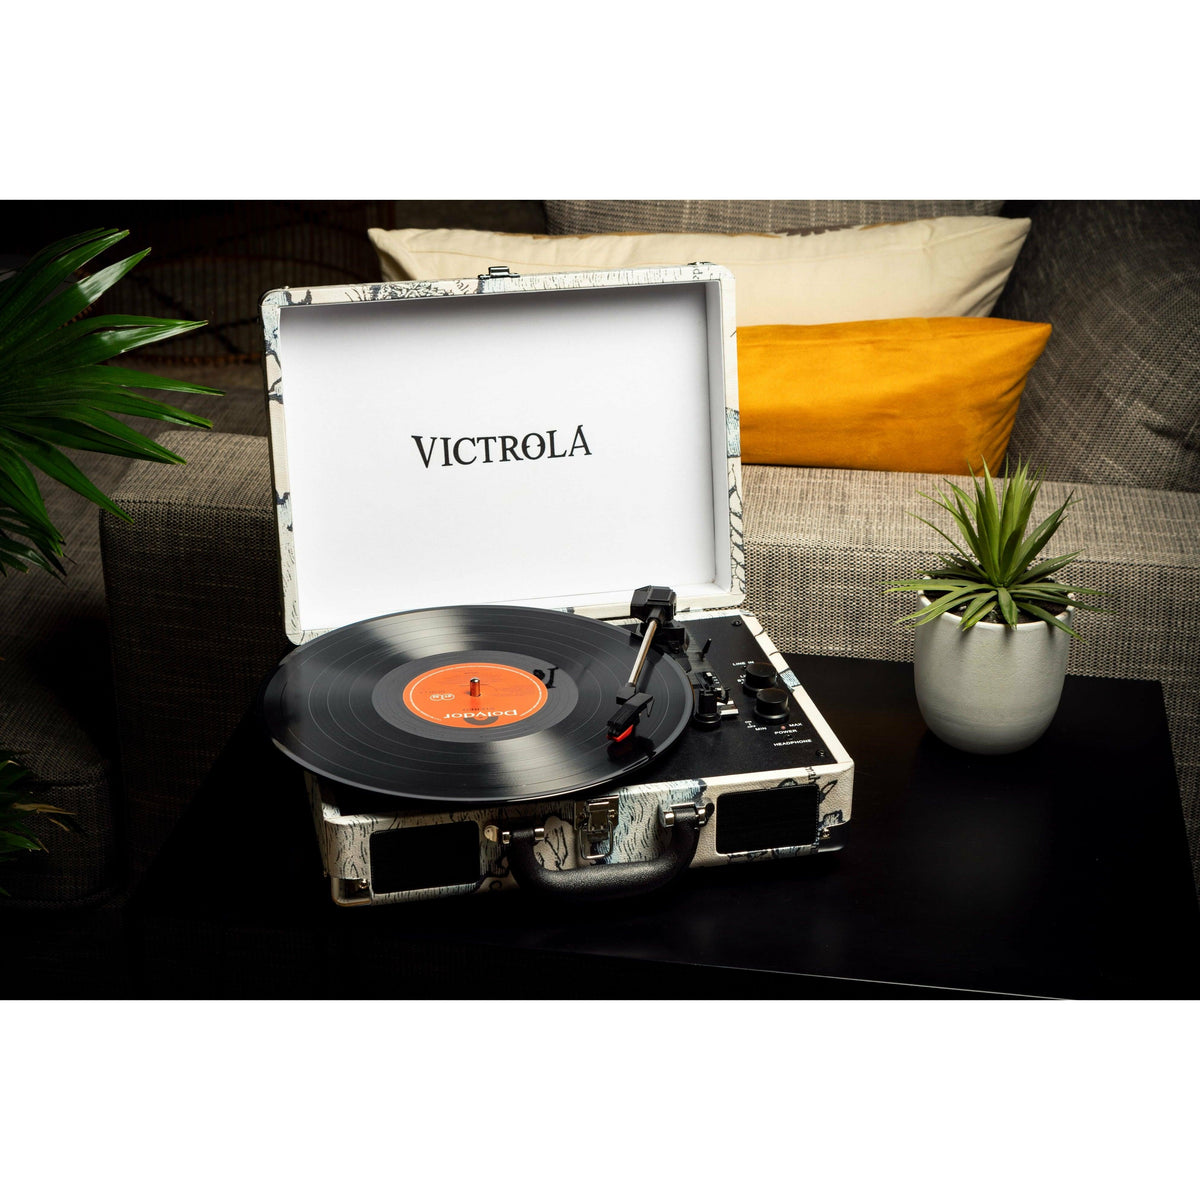 Victrola Built-in Stereo Bluetooth Portable Suitcase Record Player - Map Print | VSC-550BT-P4 (7105846247612)